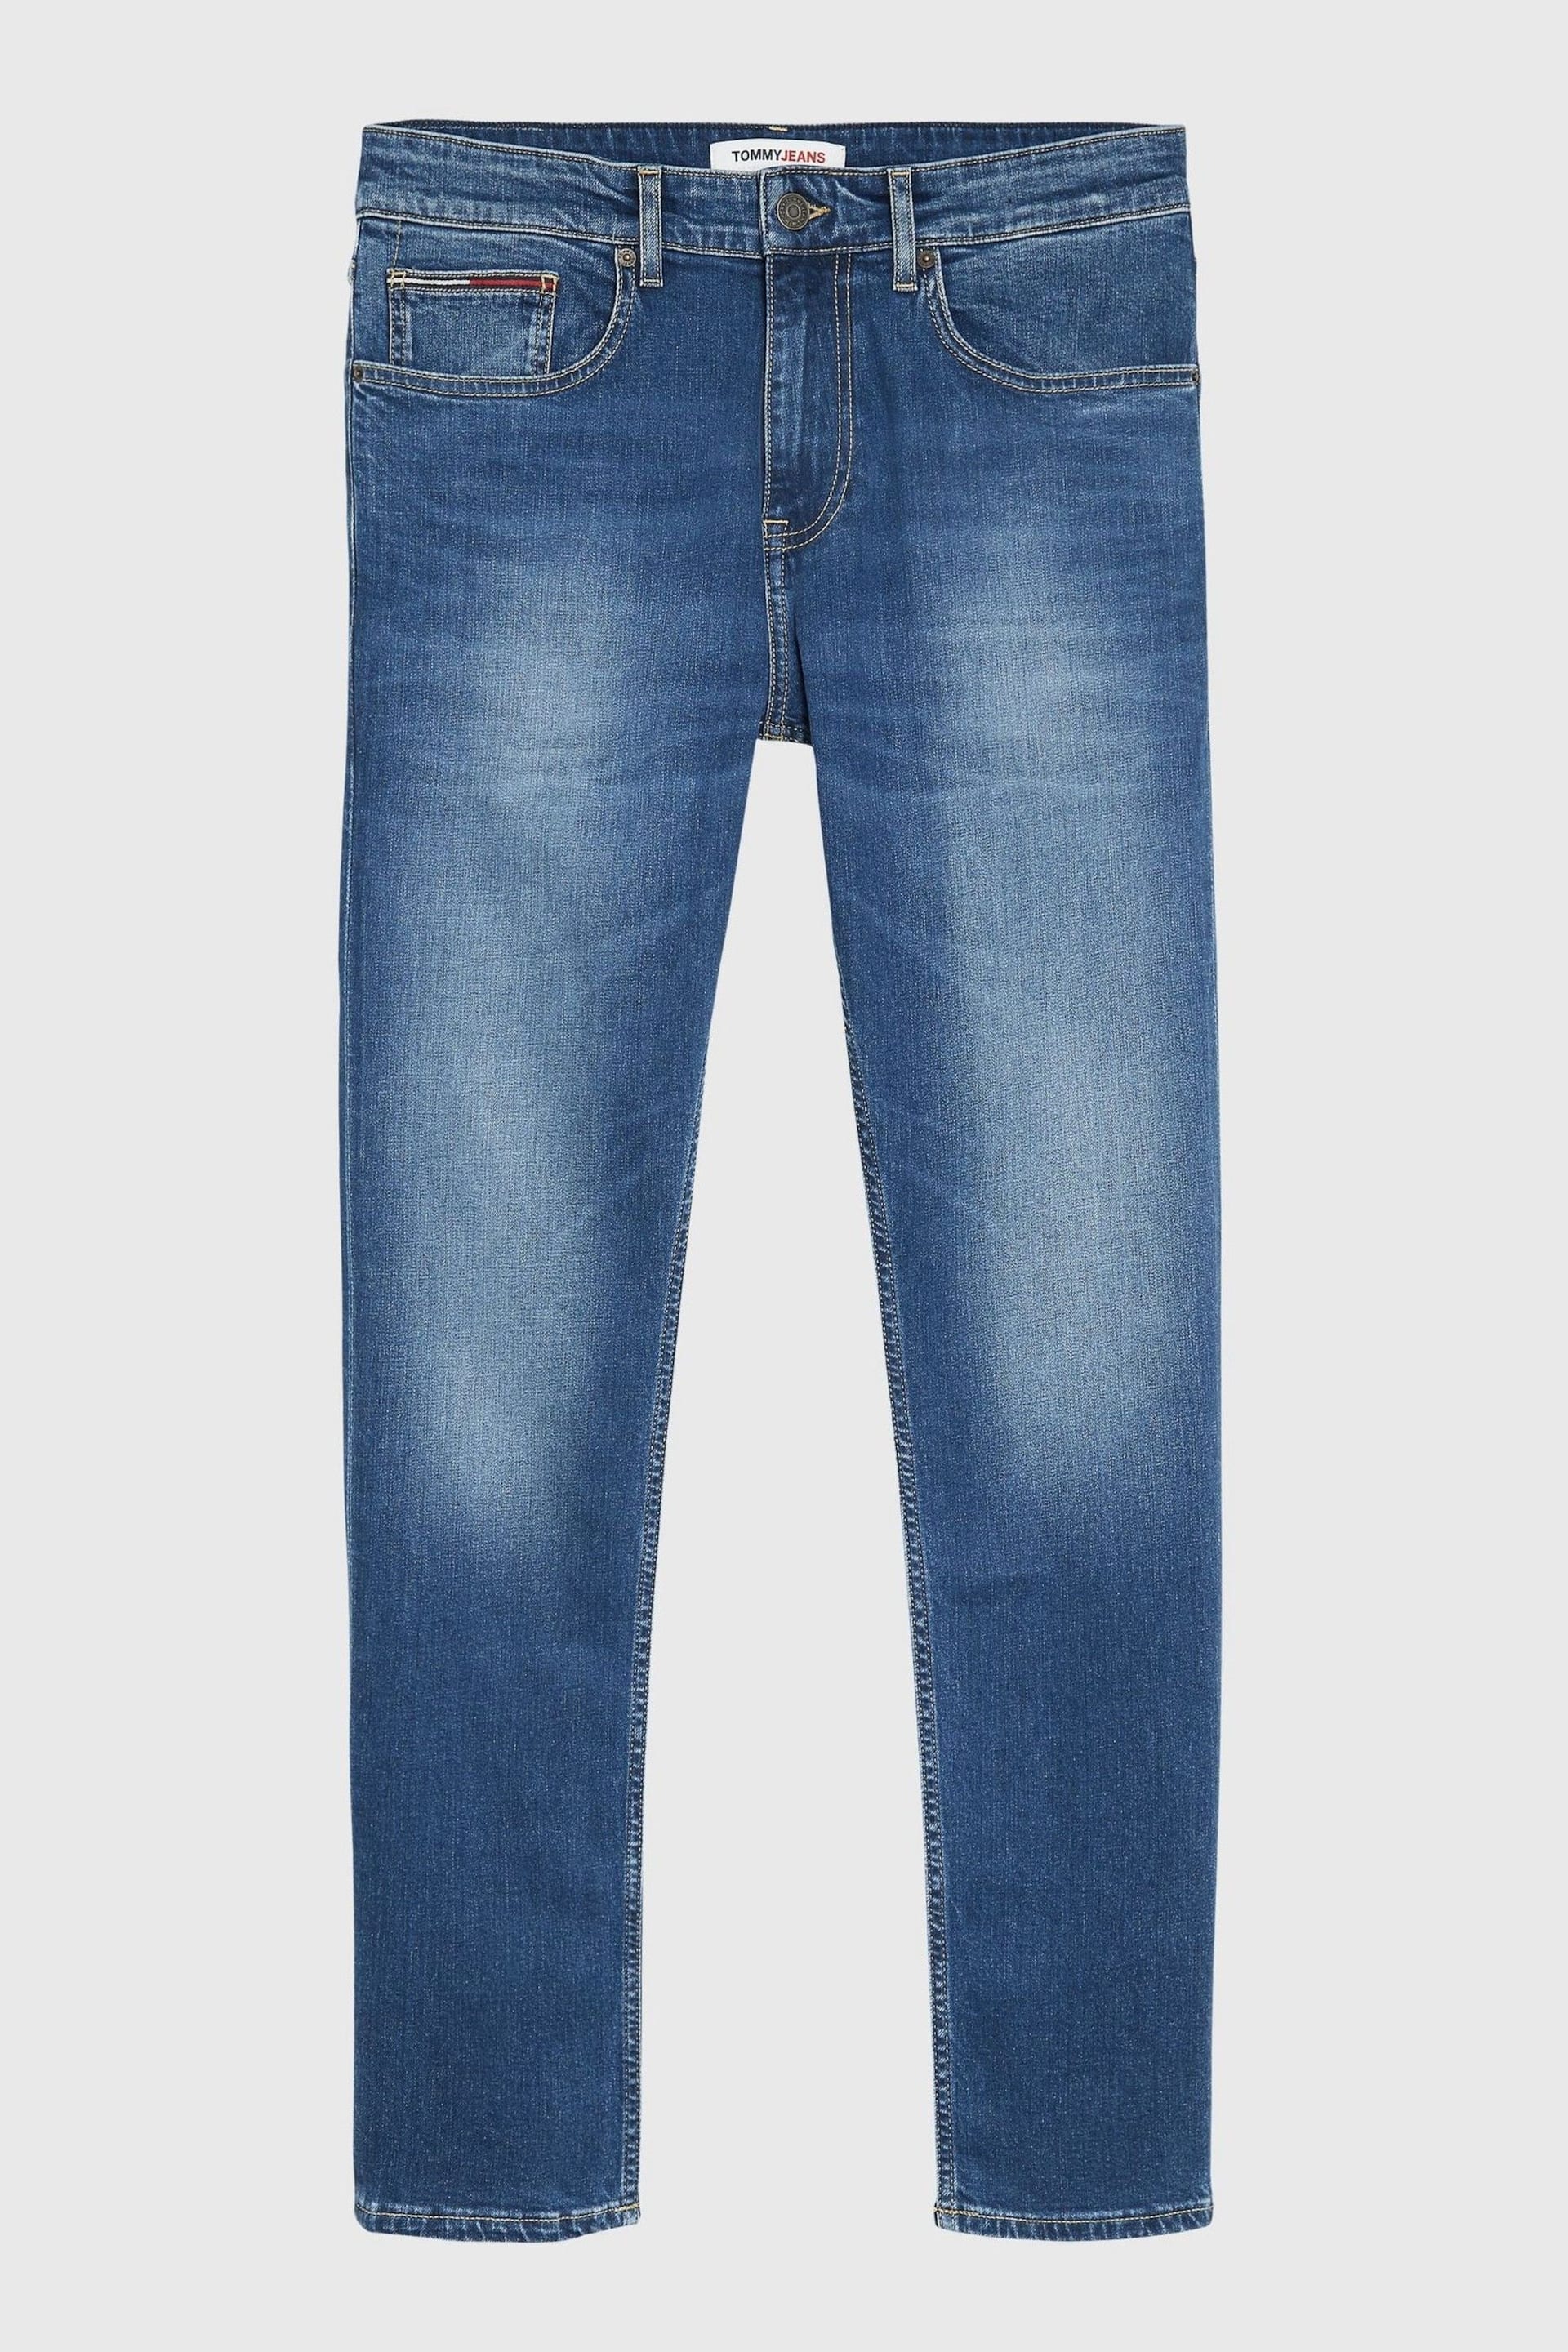 Tommy Jeans Blue Slim Tapered Fit Faded Jeans - Image 4 of 4